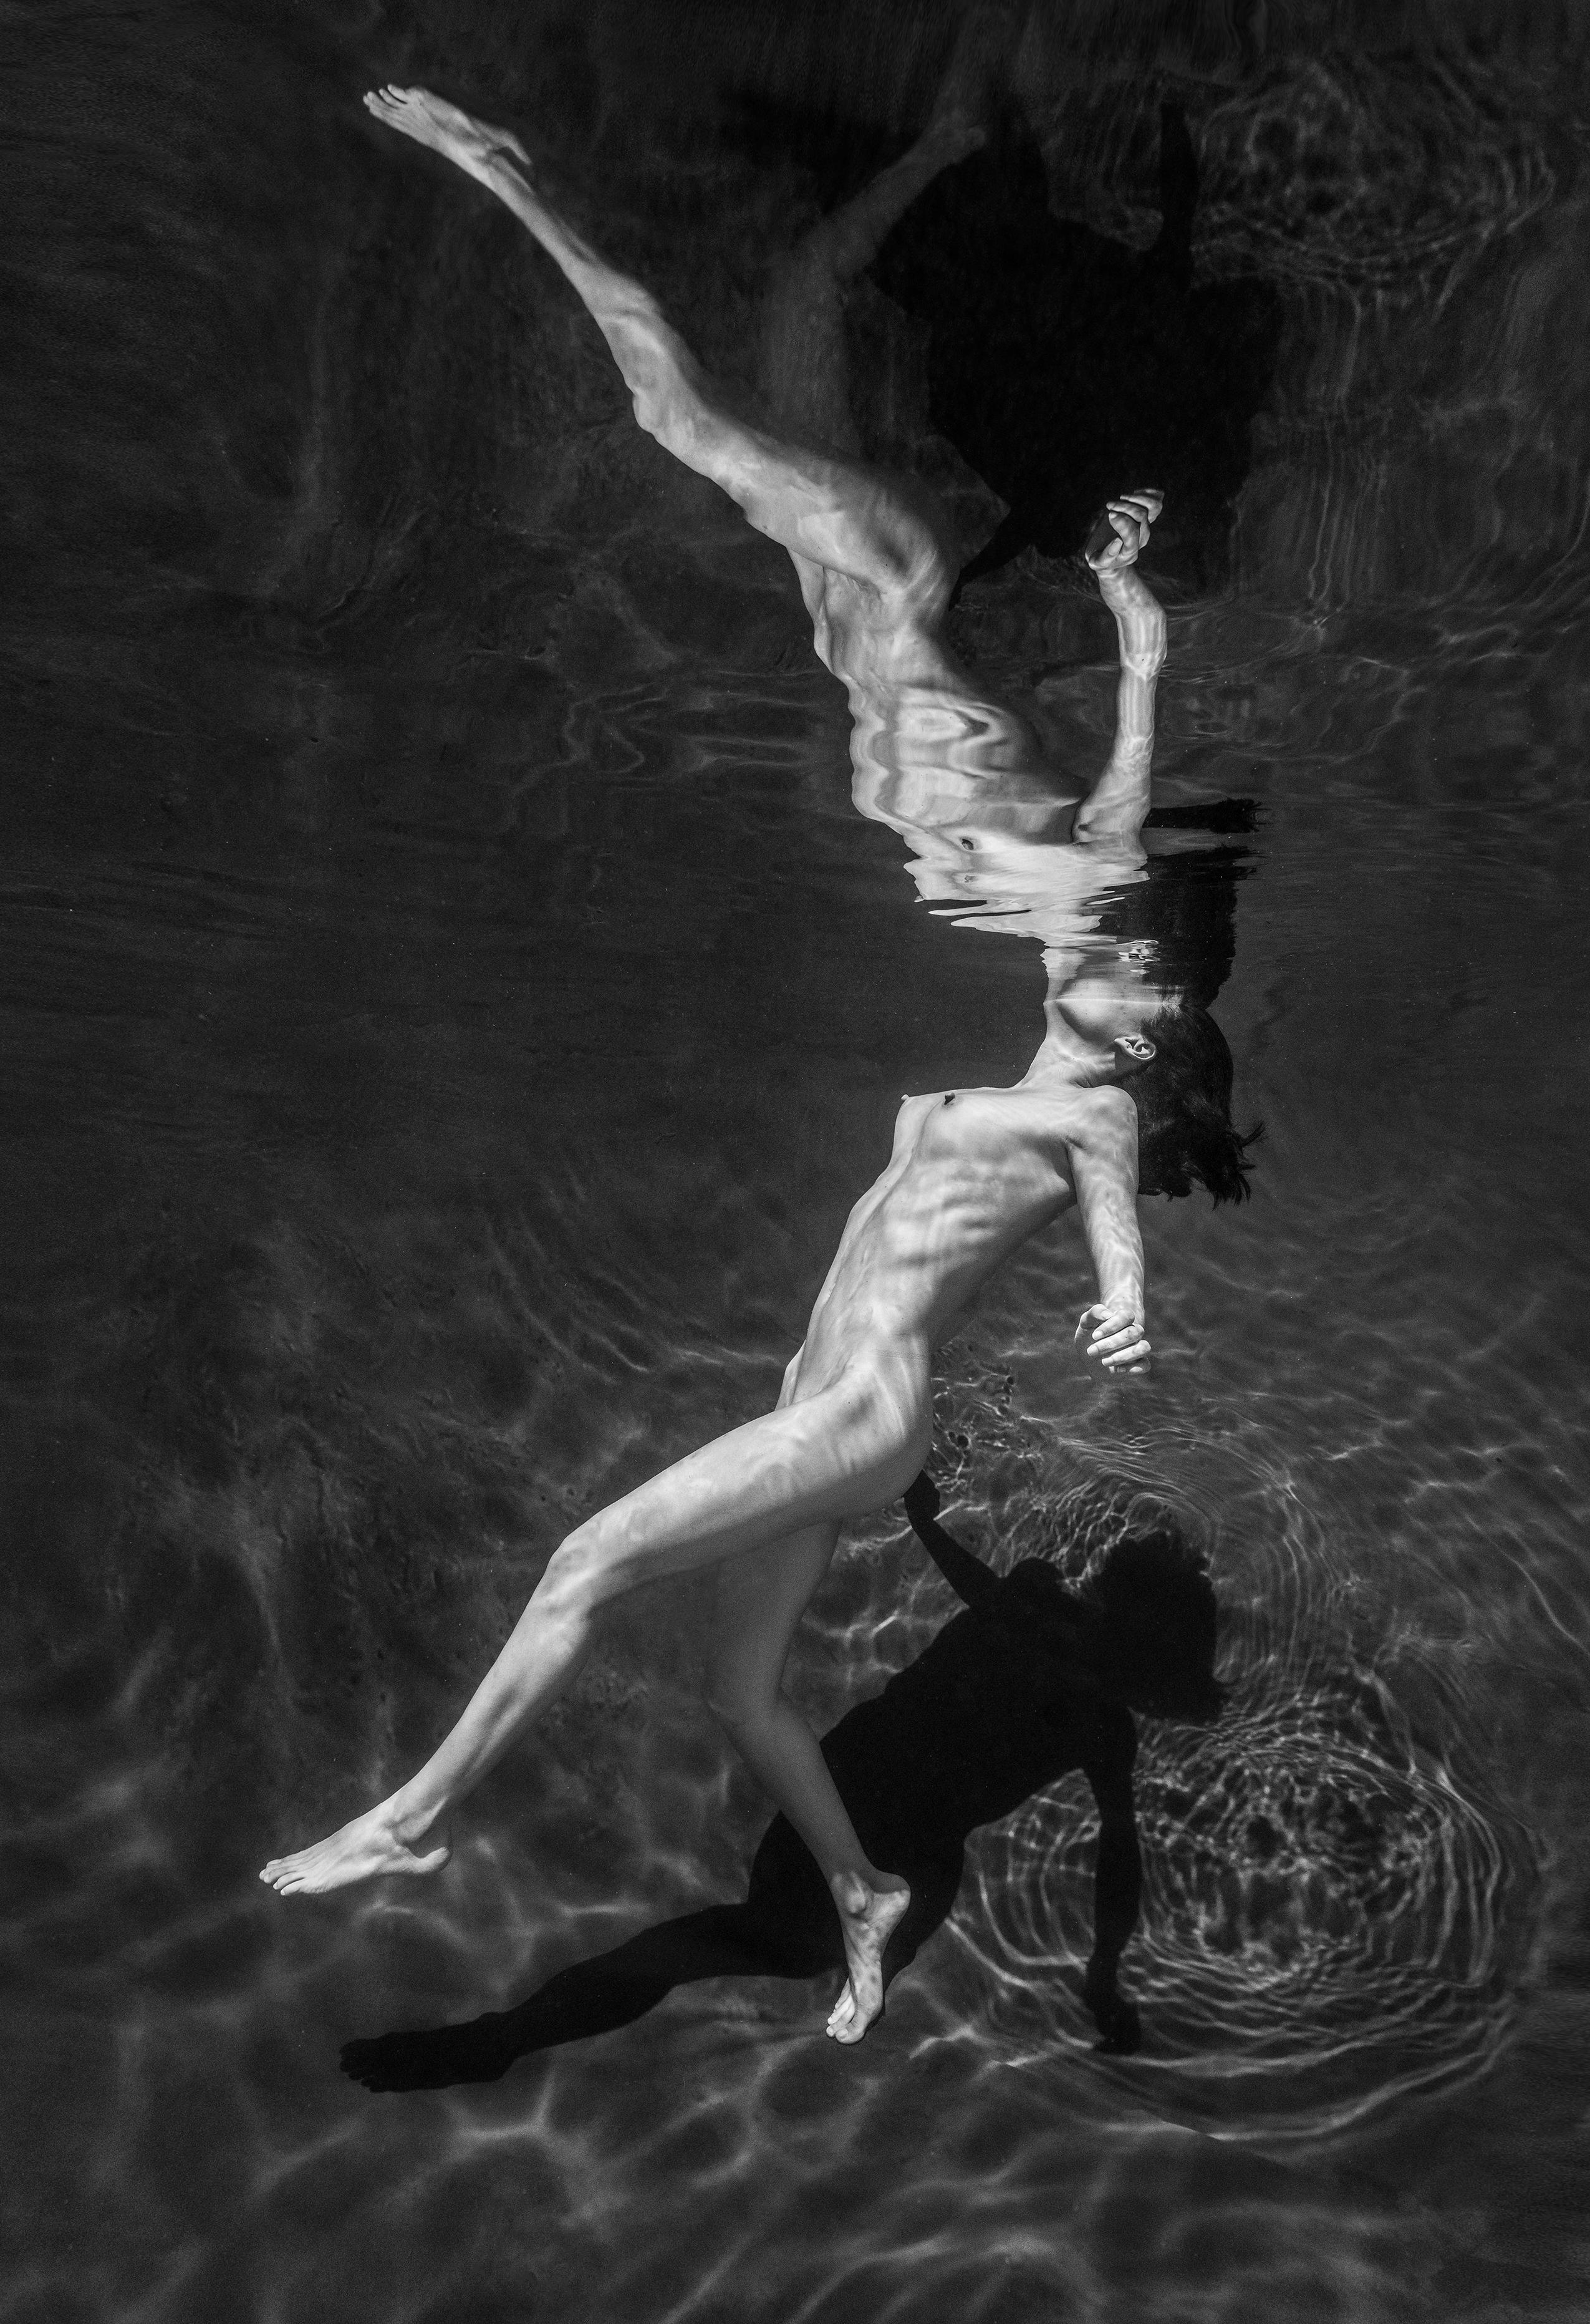 Alex Sher Black and White Photograph - Balance - underwater nude b&w photograph - archival pigment 51x35"